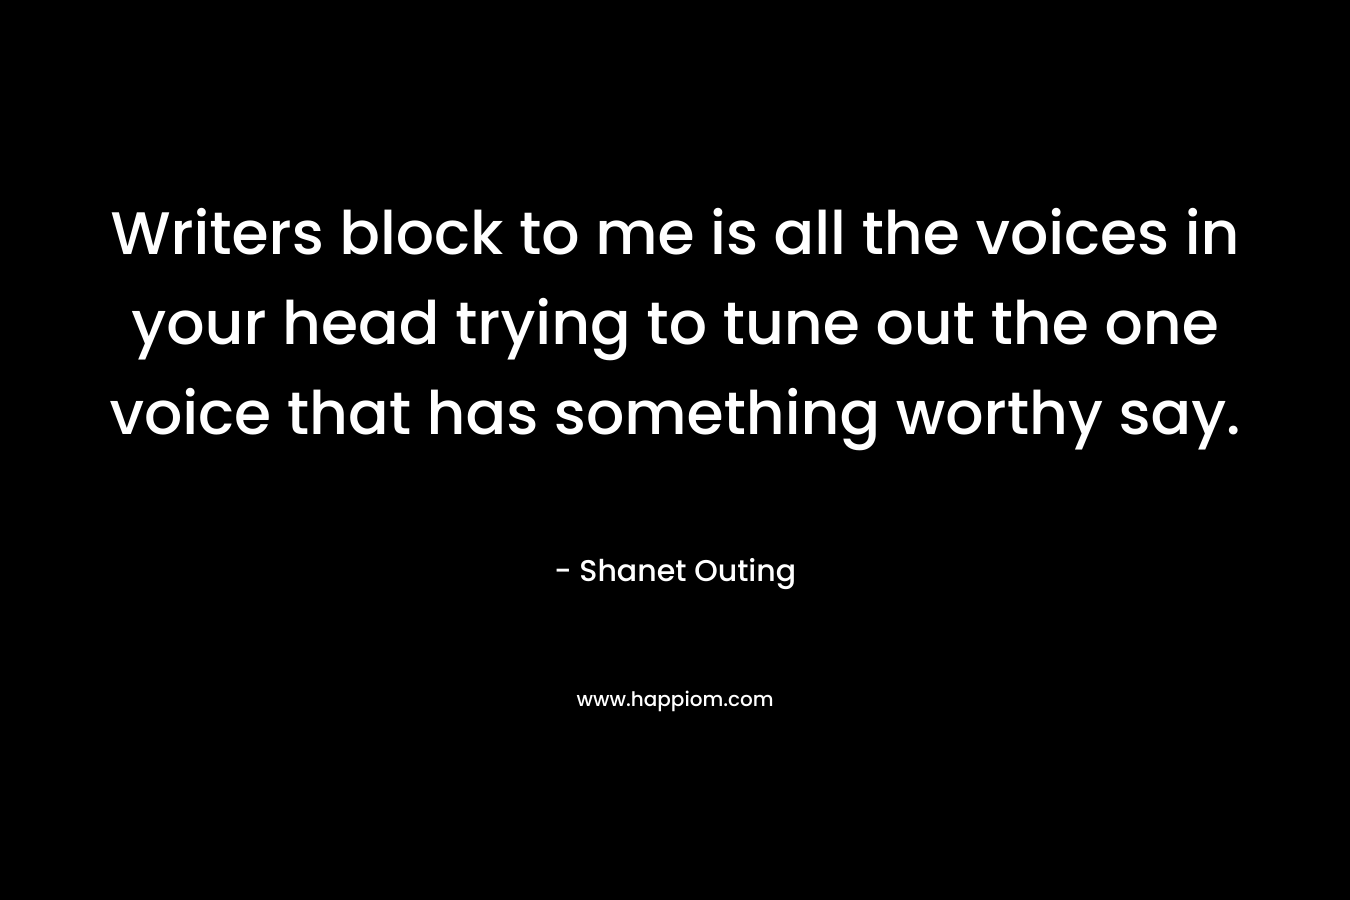 Writers block to me is all the voices in your head trying to tune out the one voice that has something worthy say.